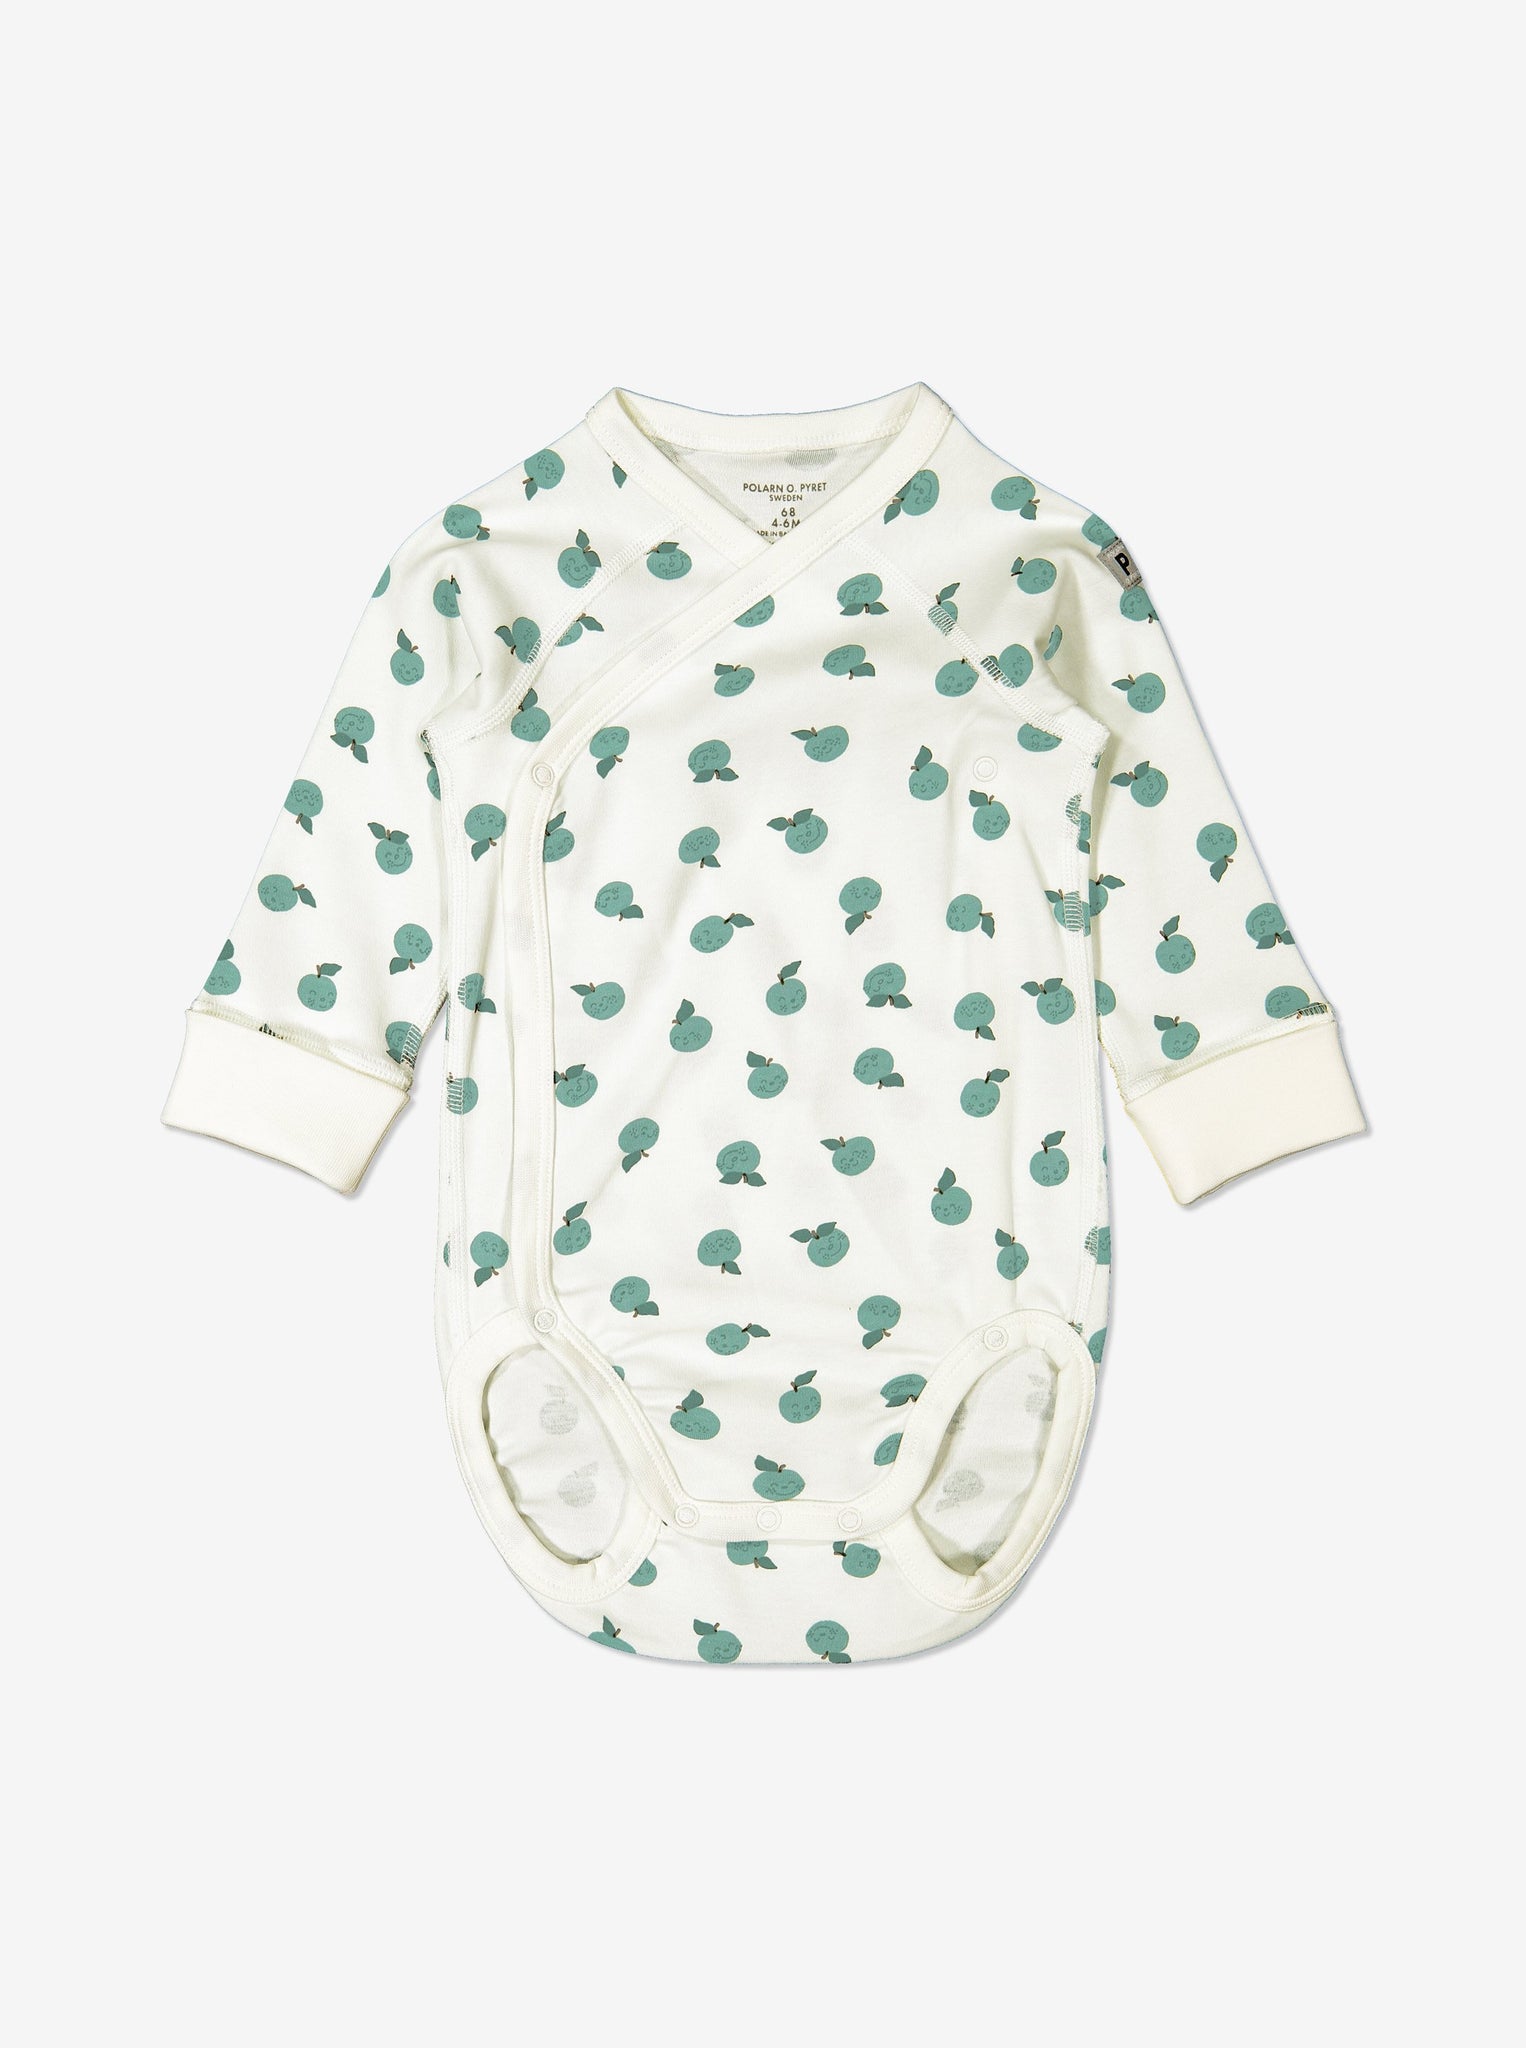 Apple print babygrow for newborn babies in a wraparound style, made from 100% organic cotton fabric